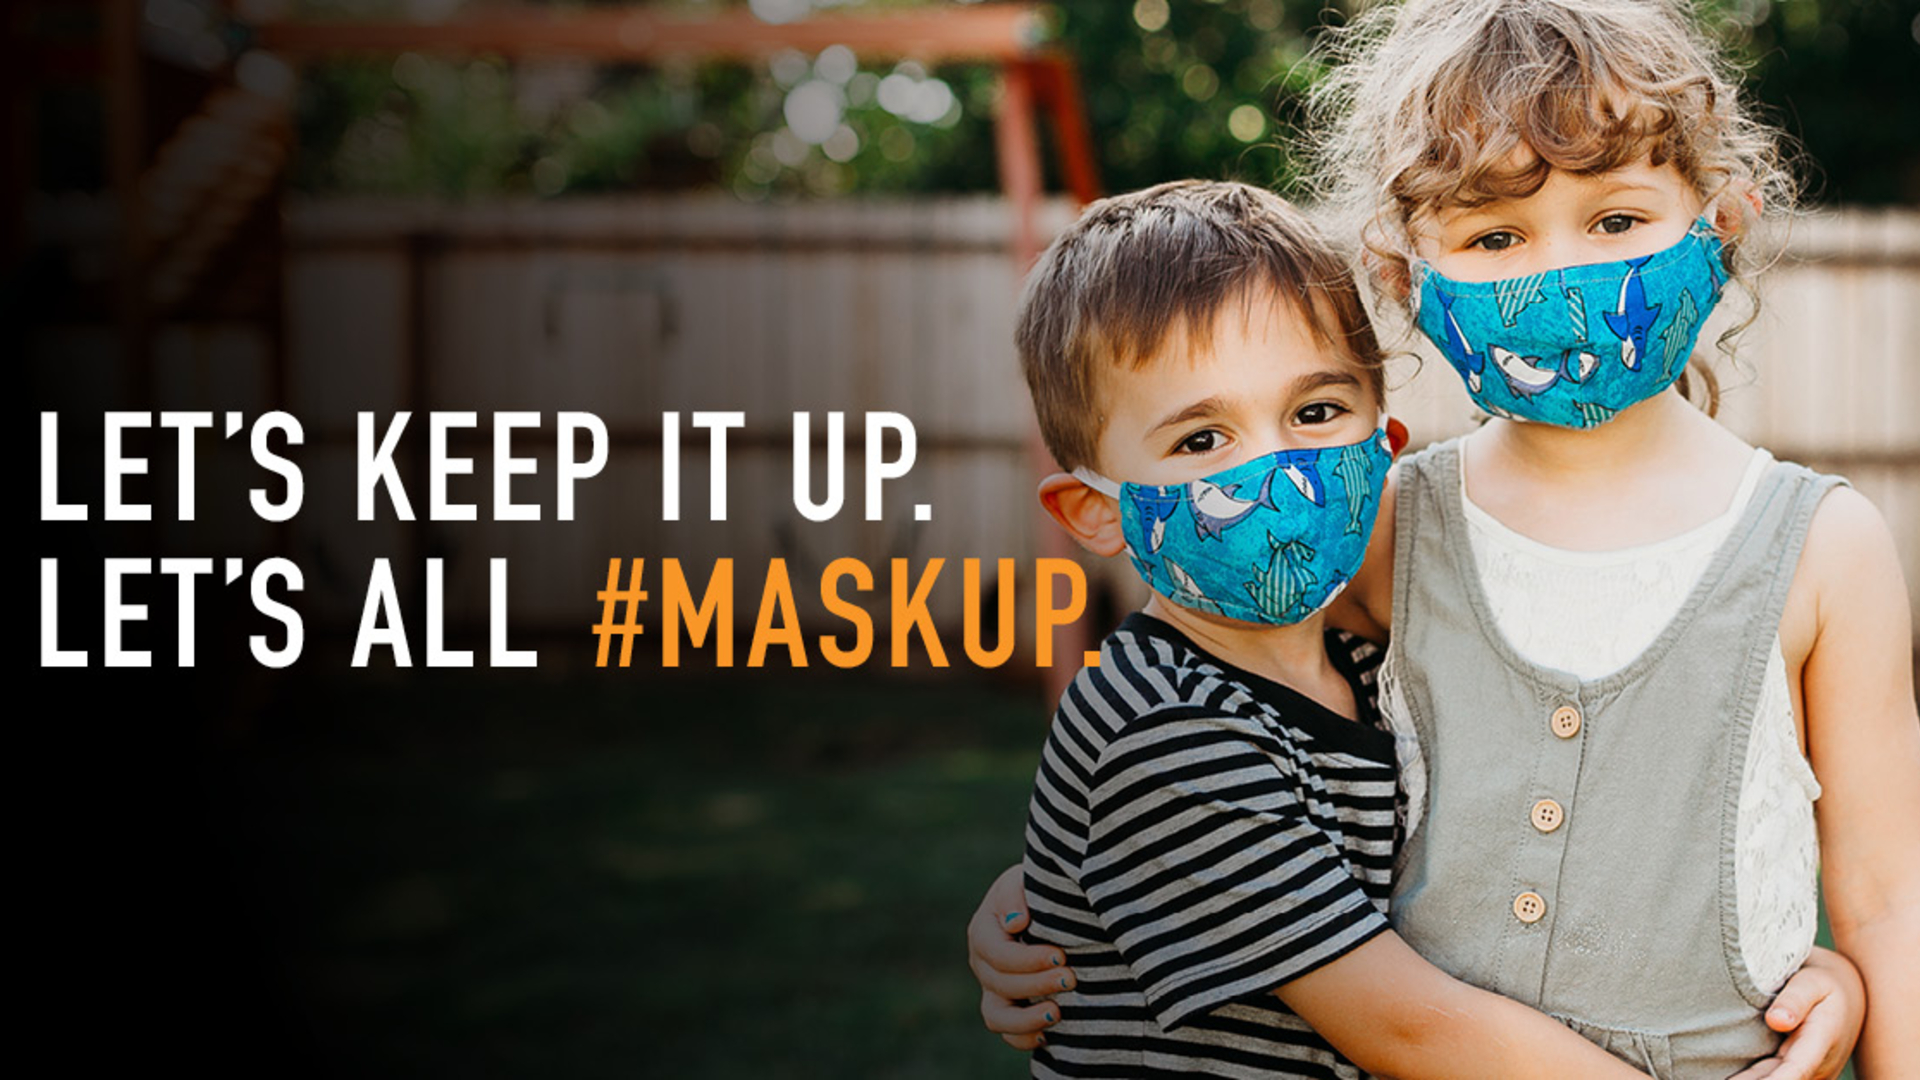 One hundred of the nation’s top health care systems across the U.S., including Charlotte-based Atrium Health, have come together with an urgent plea for all Americans: mask up, because wearing a facemask is our best chance at slowing the surging COVID-19 pandemic now. 